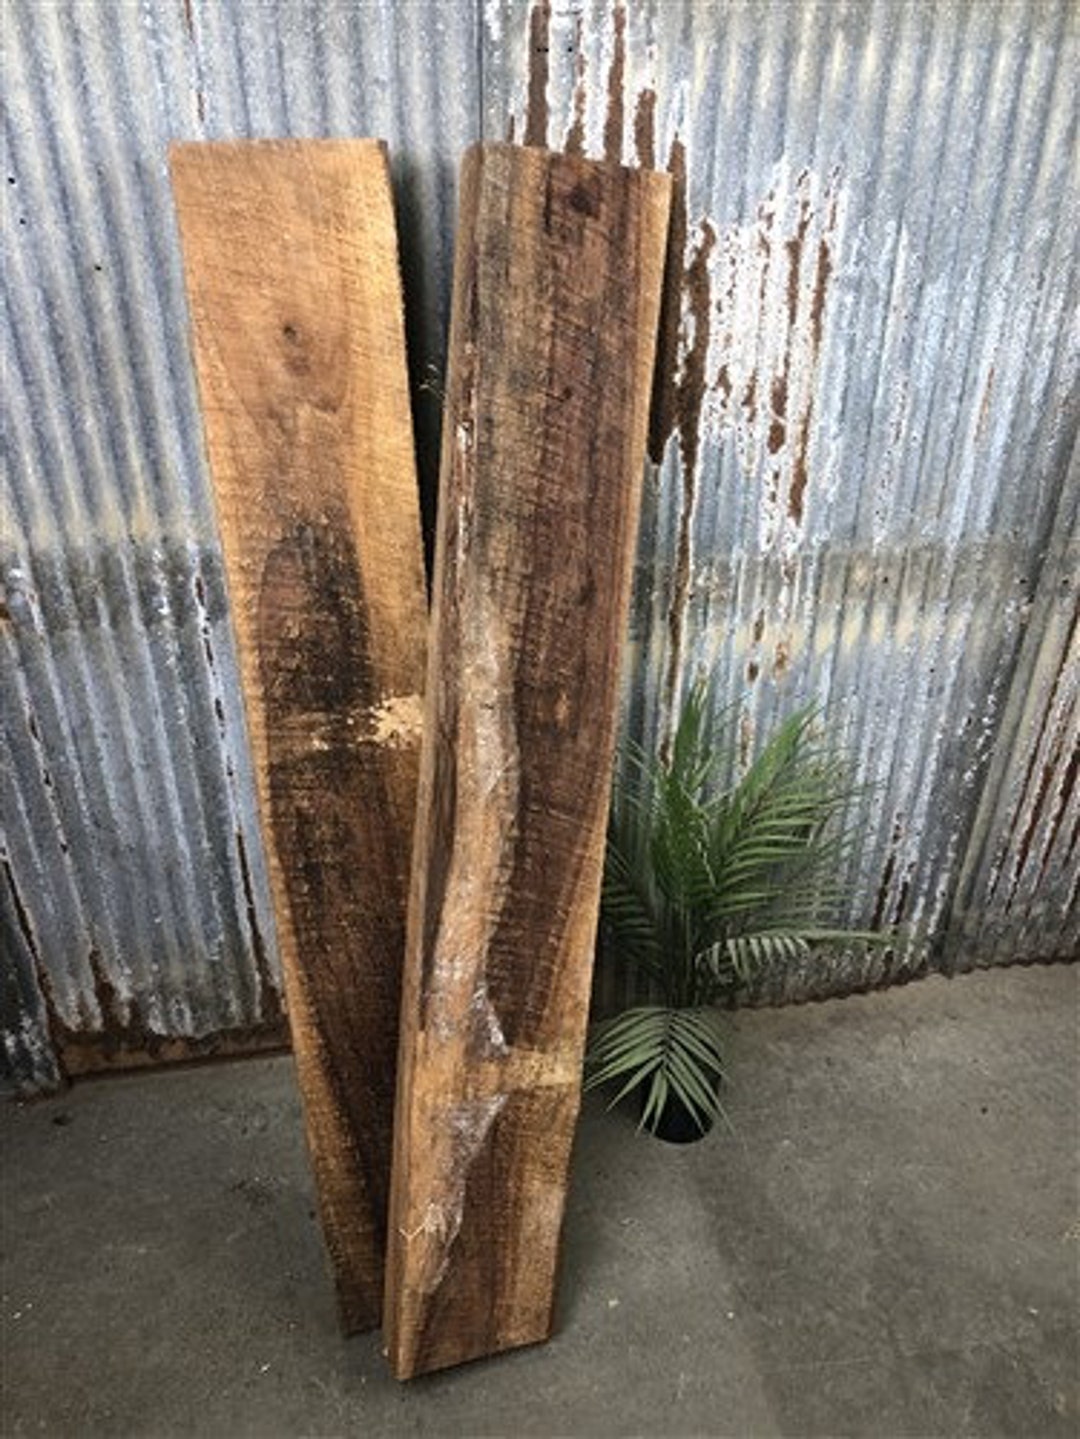 Bundle of Reclaimed Wood Planks for Crafts Rustic Shelves Reclaimed Wood  Board Cedar Wood Planks 2 Boards 3 